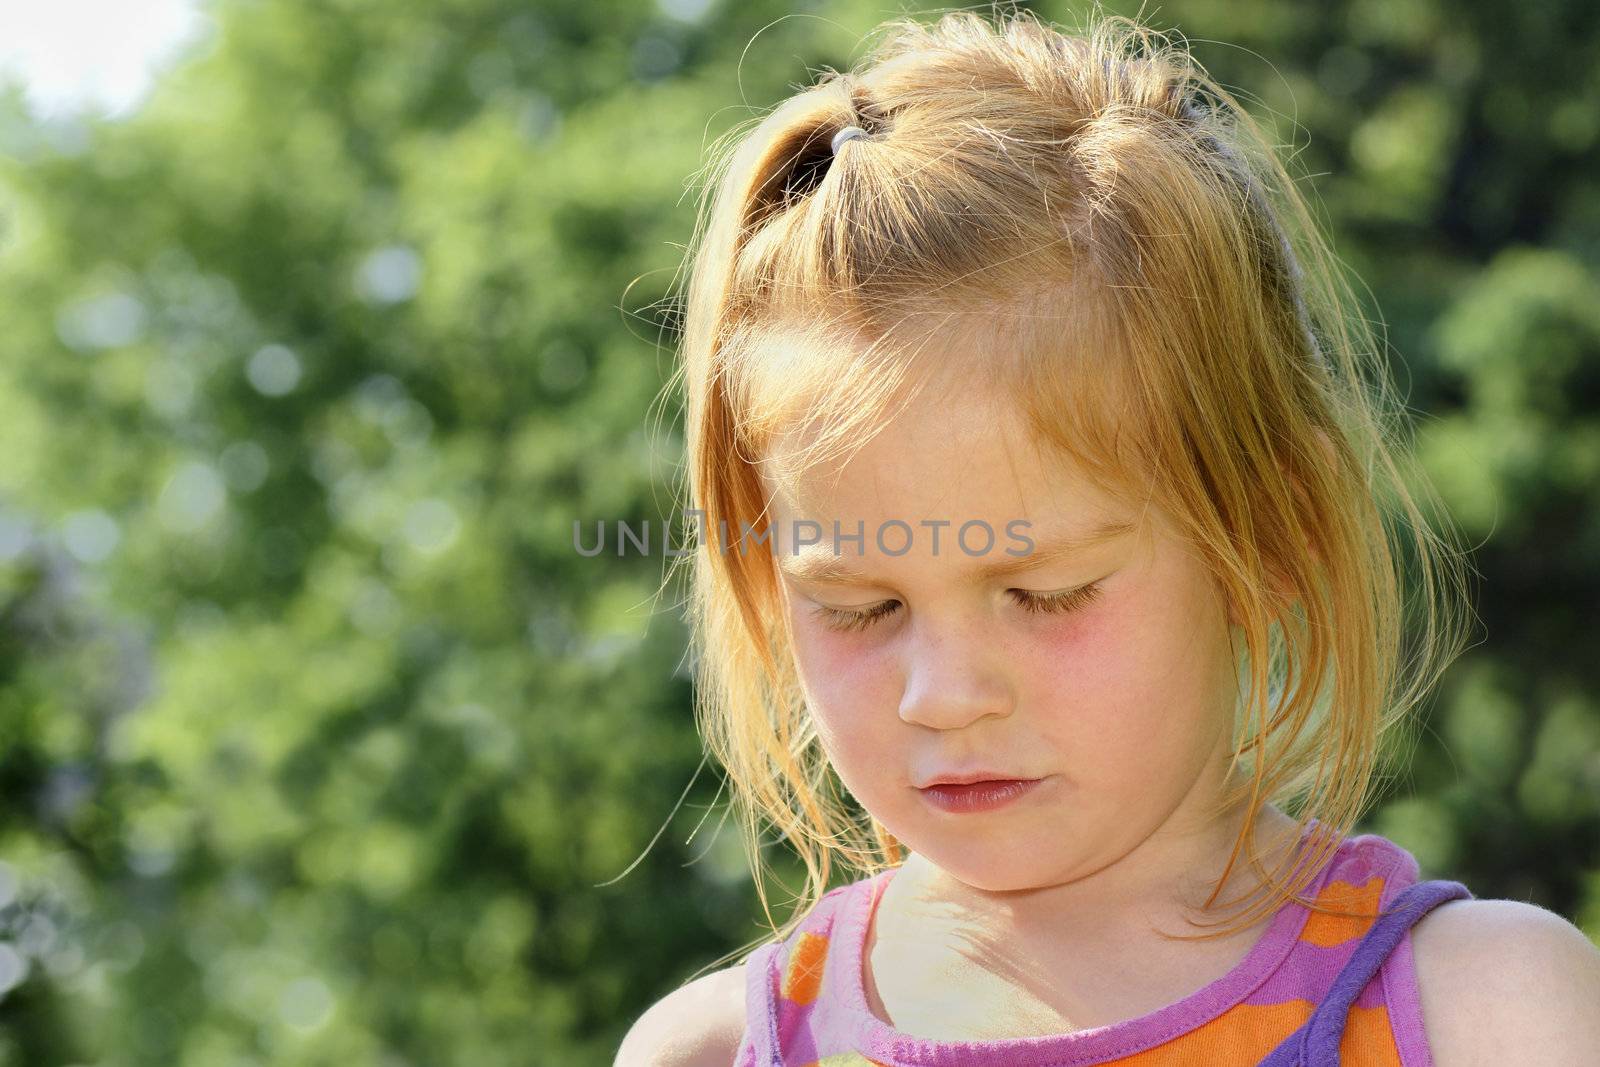 Sad or crying red haired little girl looking down.